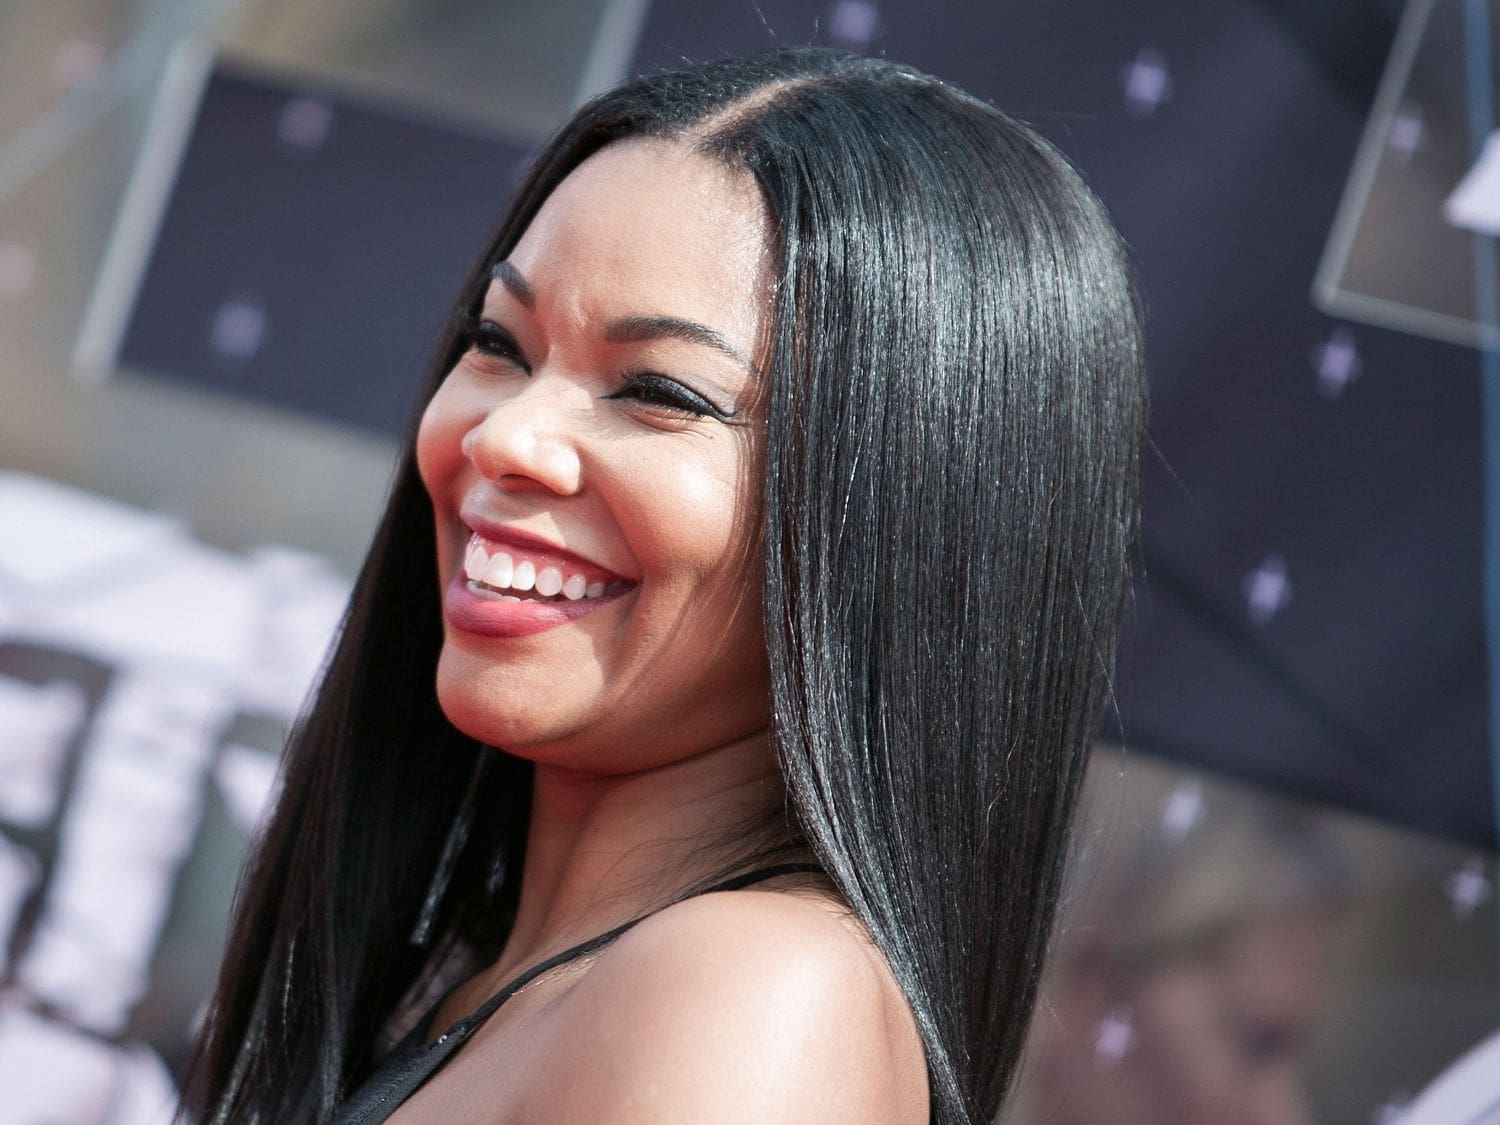 Gabrielle Union Poses With Kaavia James And Fans Are In Awe